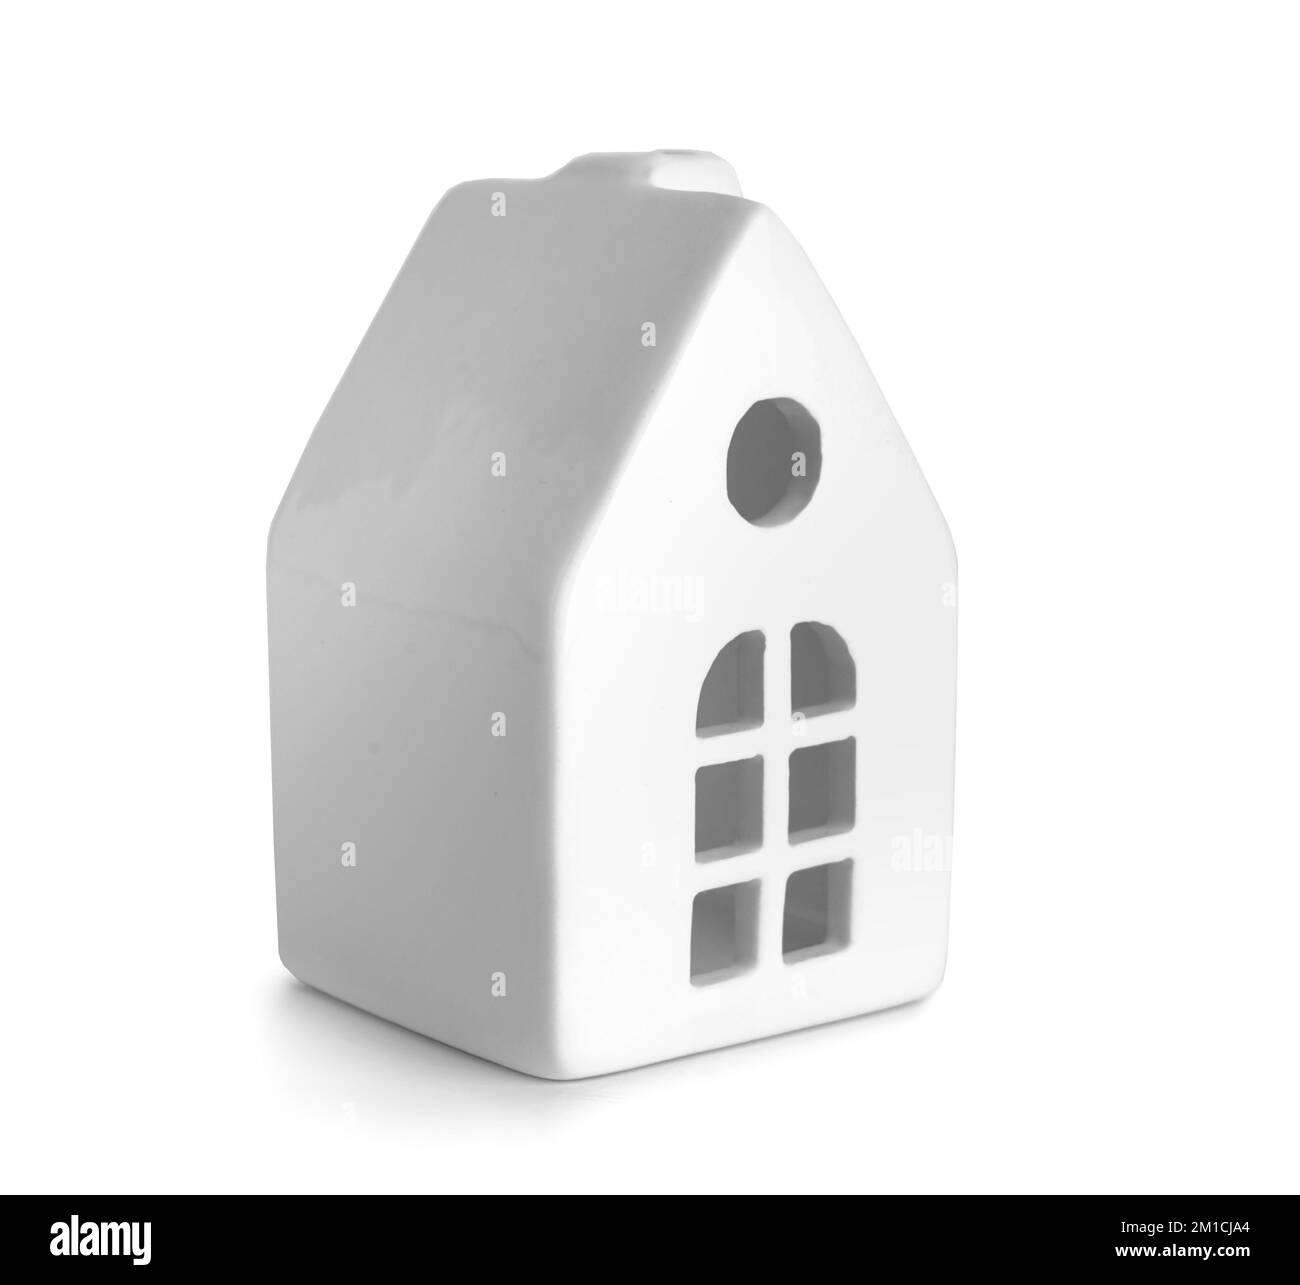 Candle holder in shape of house on white background Stock Photo